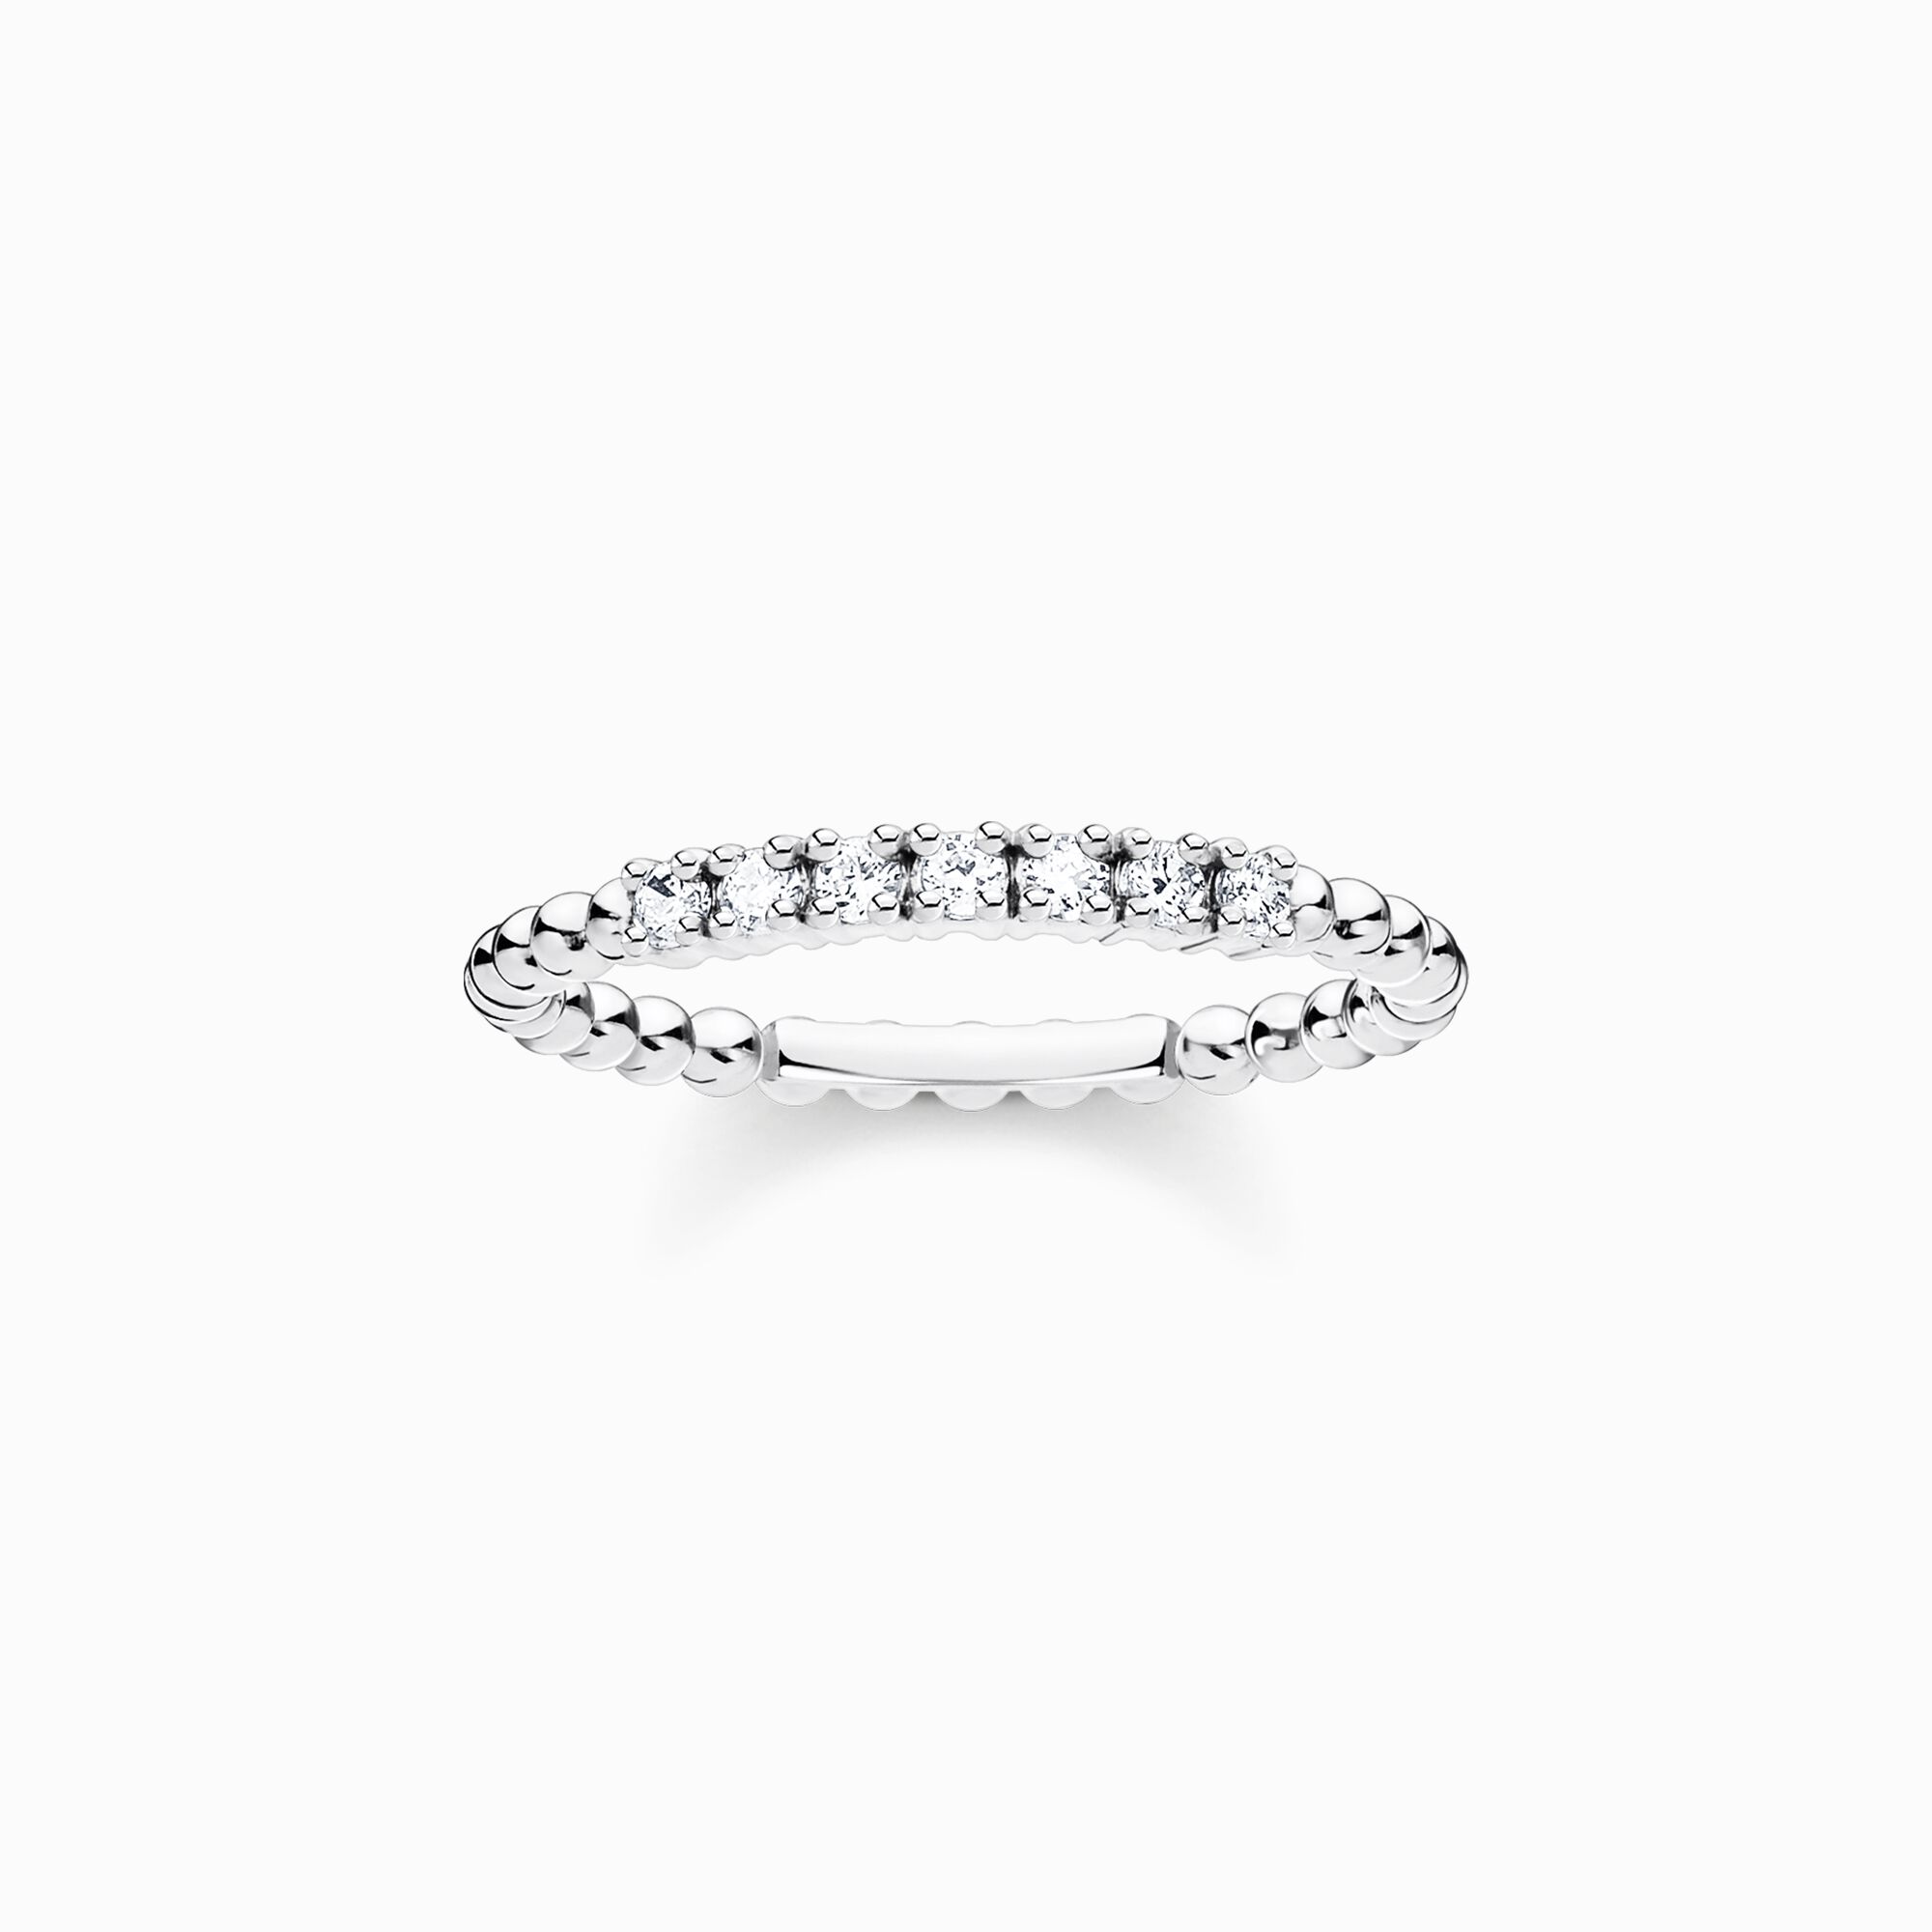 Ring dots with white stones silver from the Charming Collection collection in the THOMAS SABO online store